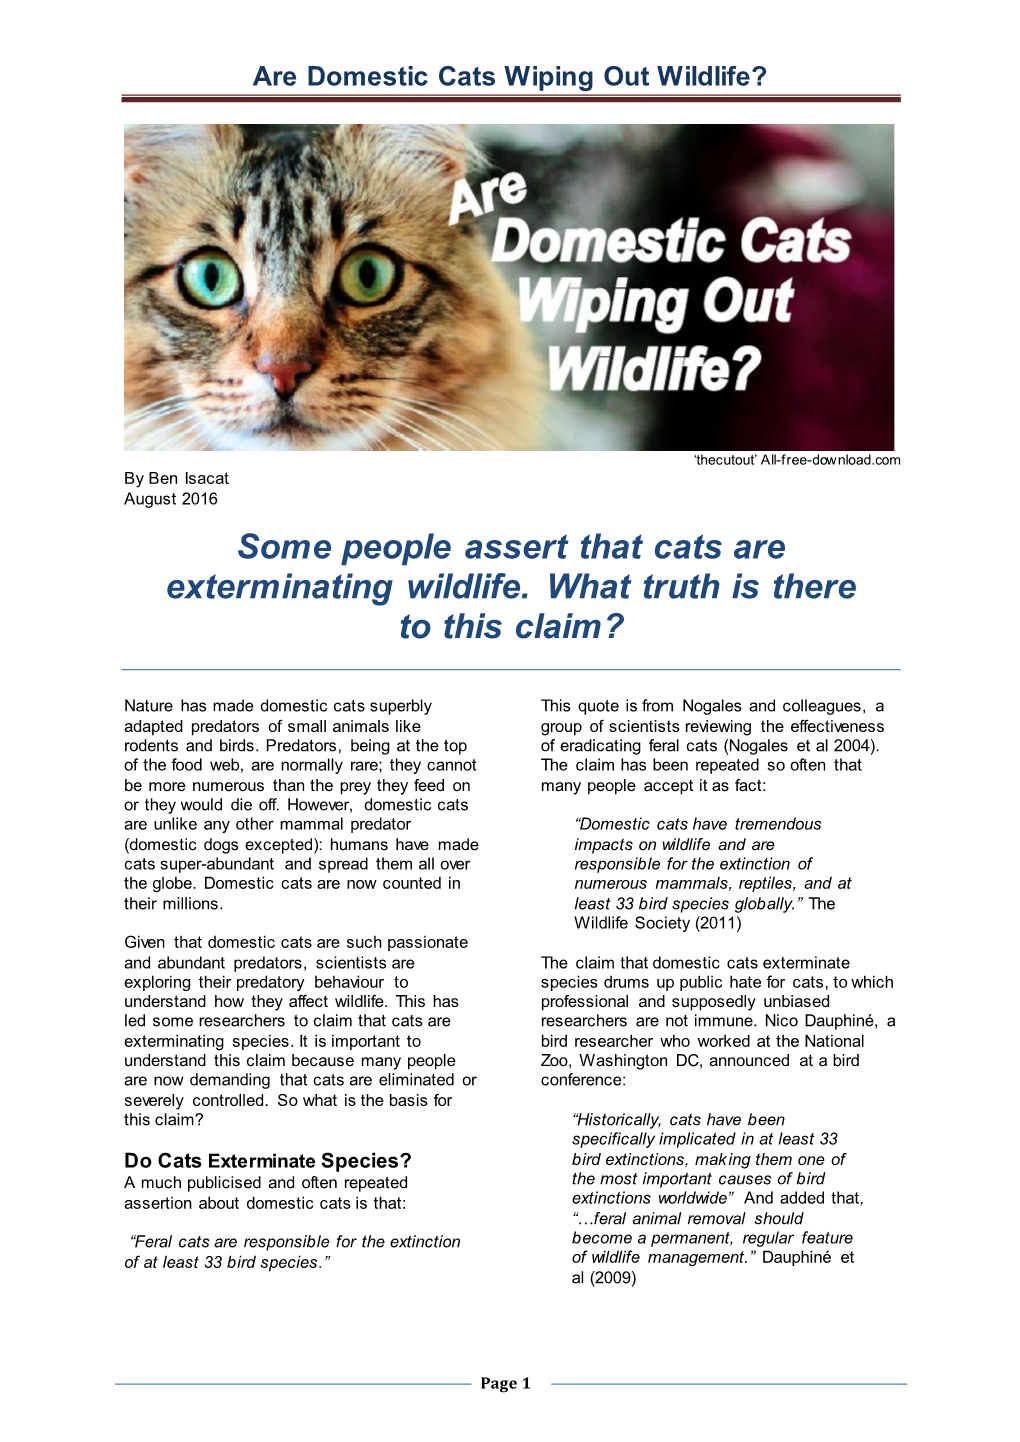 Are Domestic Cats Wiping out Wildlife?